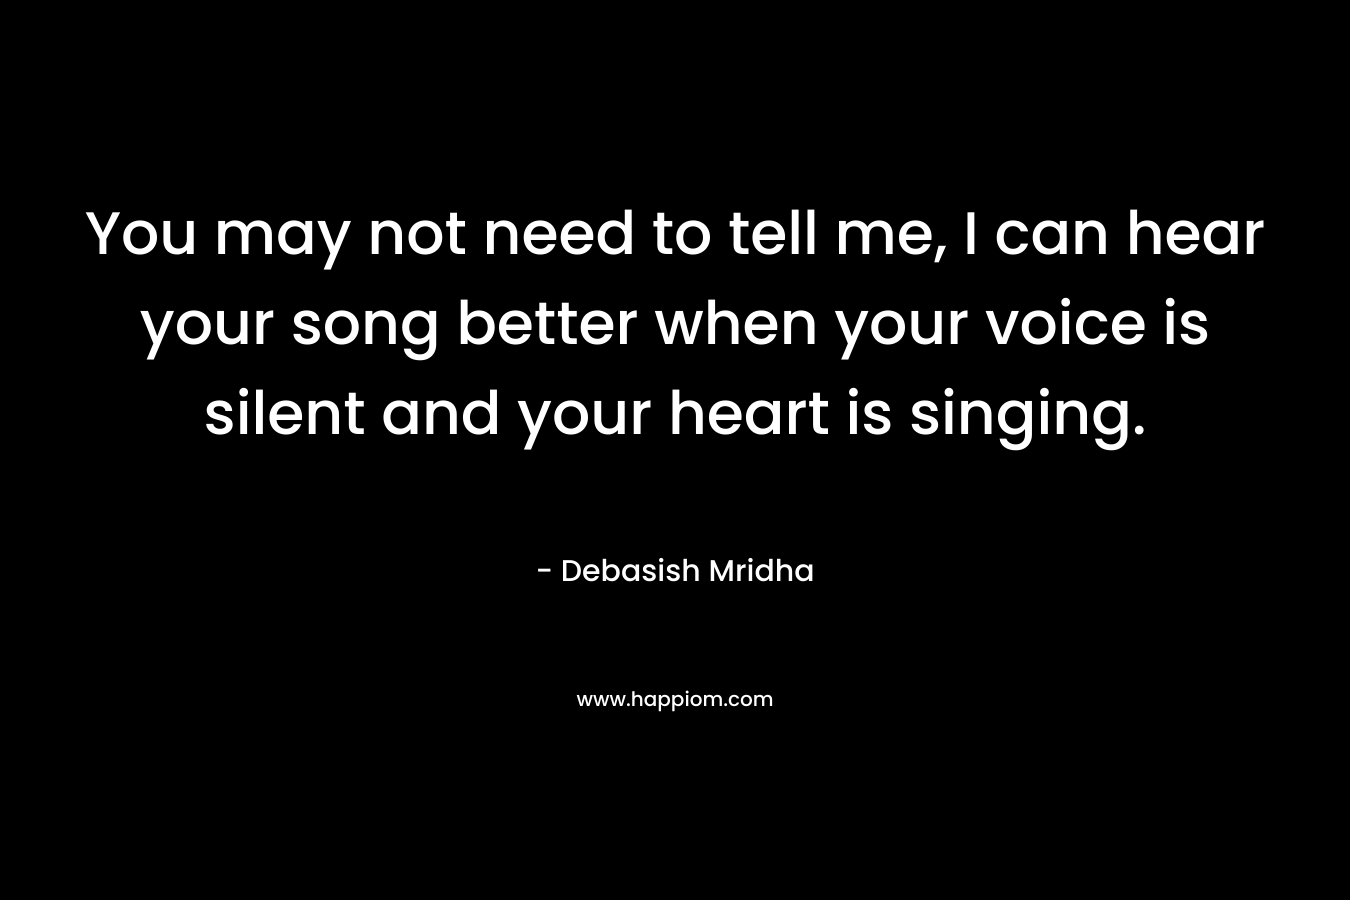 You may not need to tell me, I can hear your song better when your voice is silent and your heart is singing.